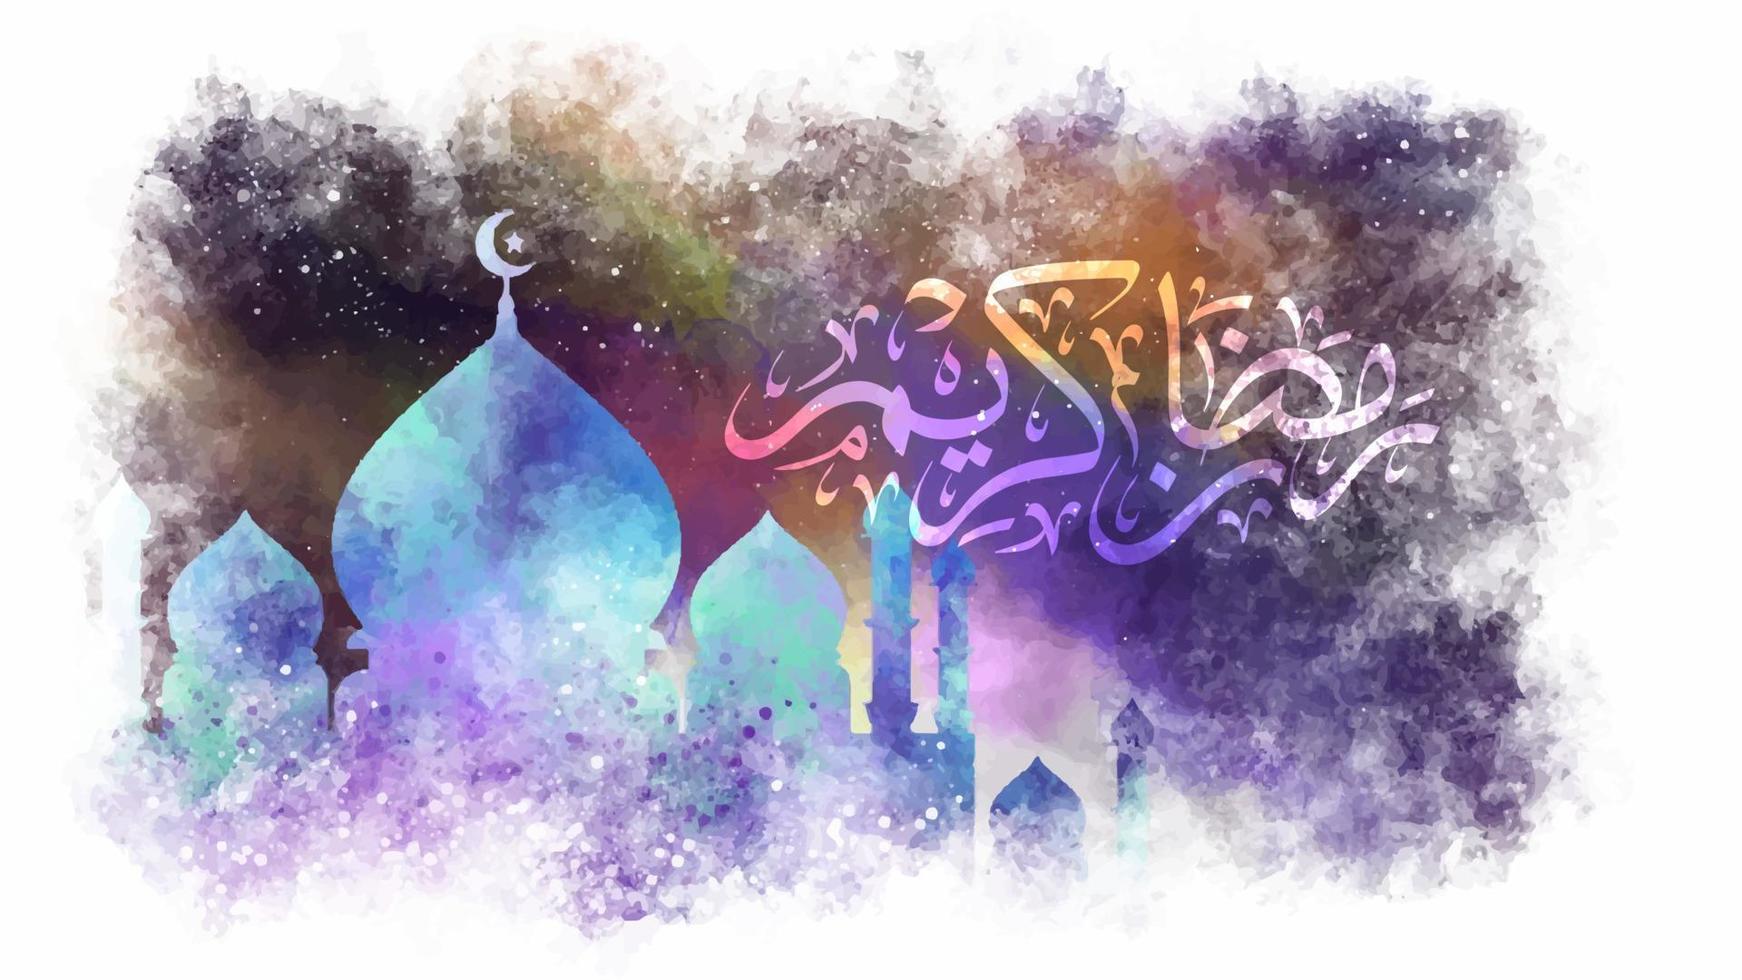 Abstract watercolor mosque with Ramadan Kareem's text in Arabic Calligraphy. Beautiful hand-drawn Islamic celebration background vector